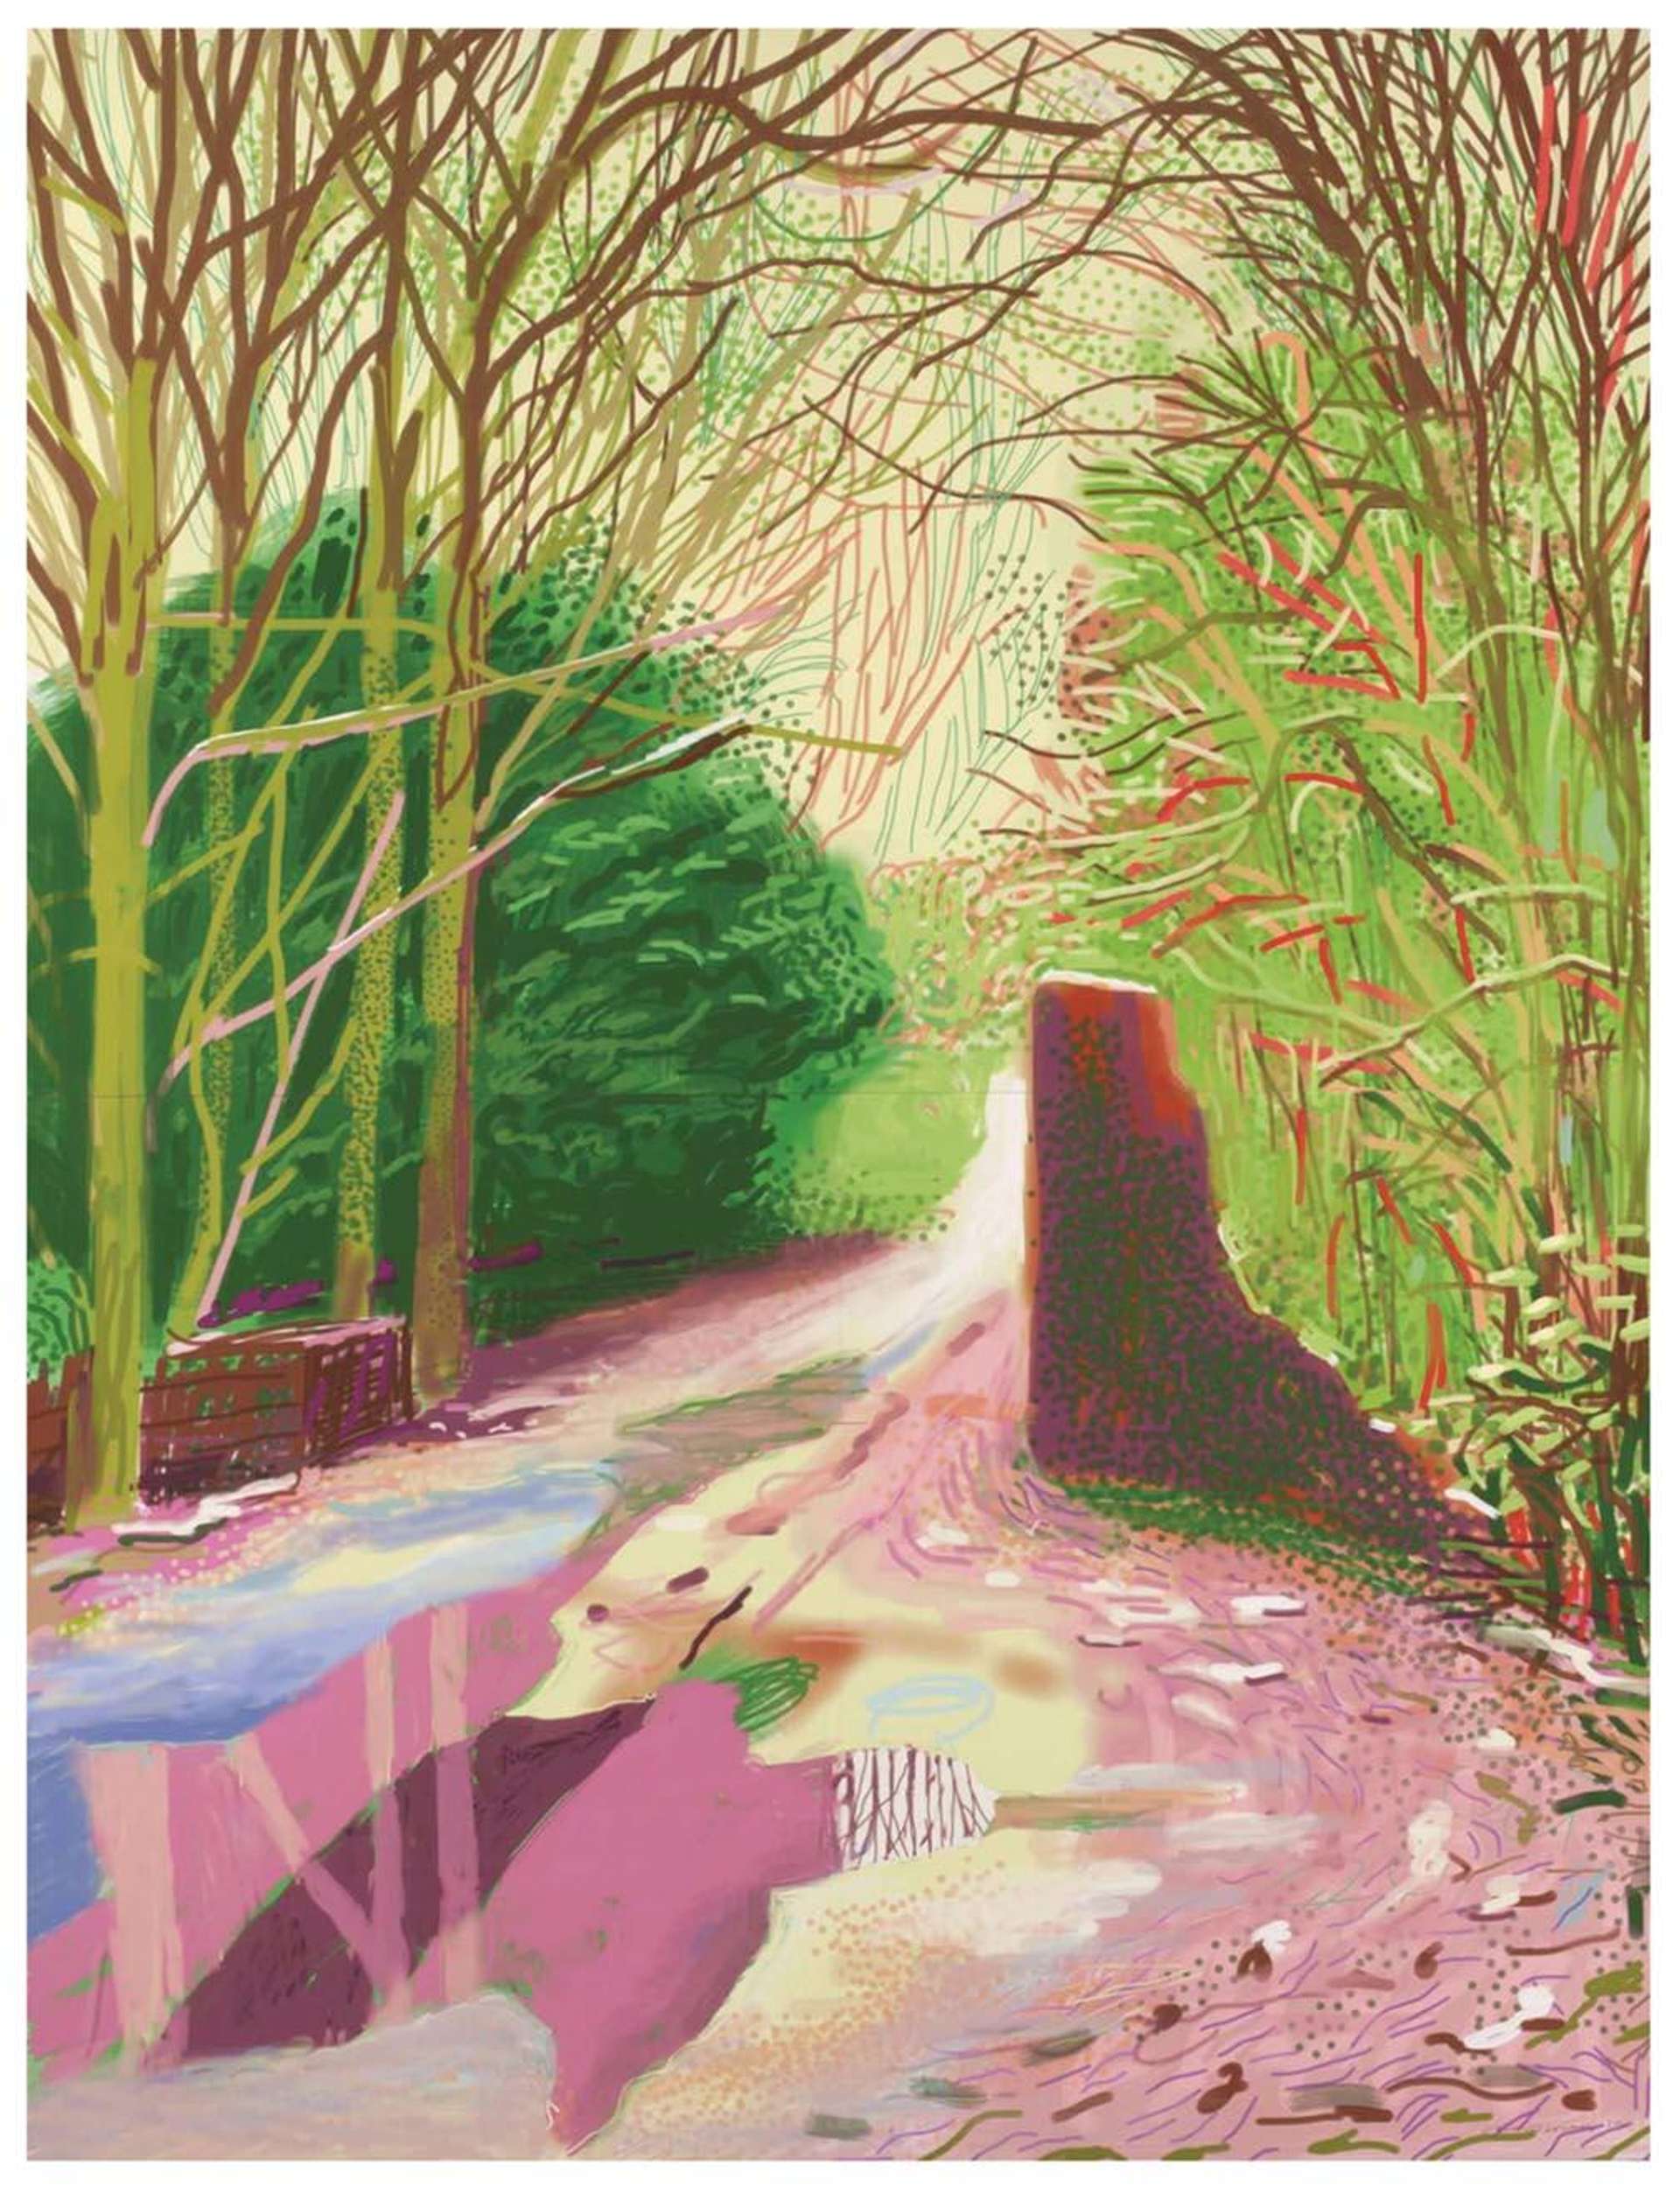 The Arrival Of Spring In Woldgate, East Yorkshire 2nd January 2011 by David Hockney - MyArtBroker